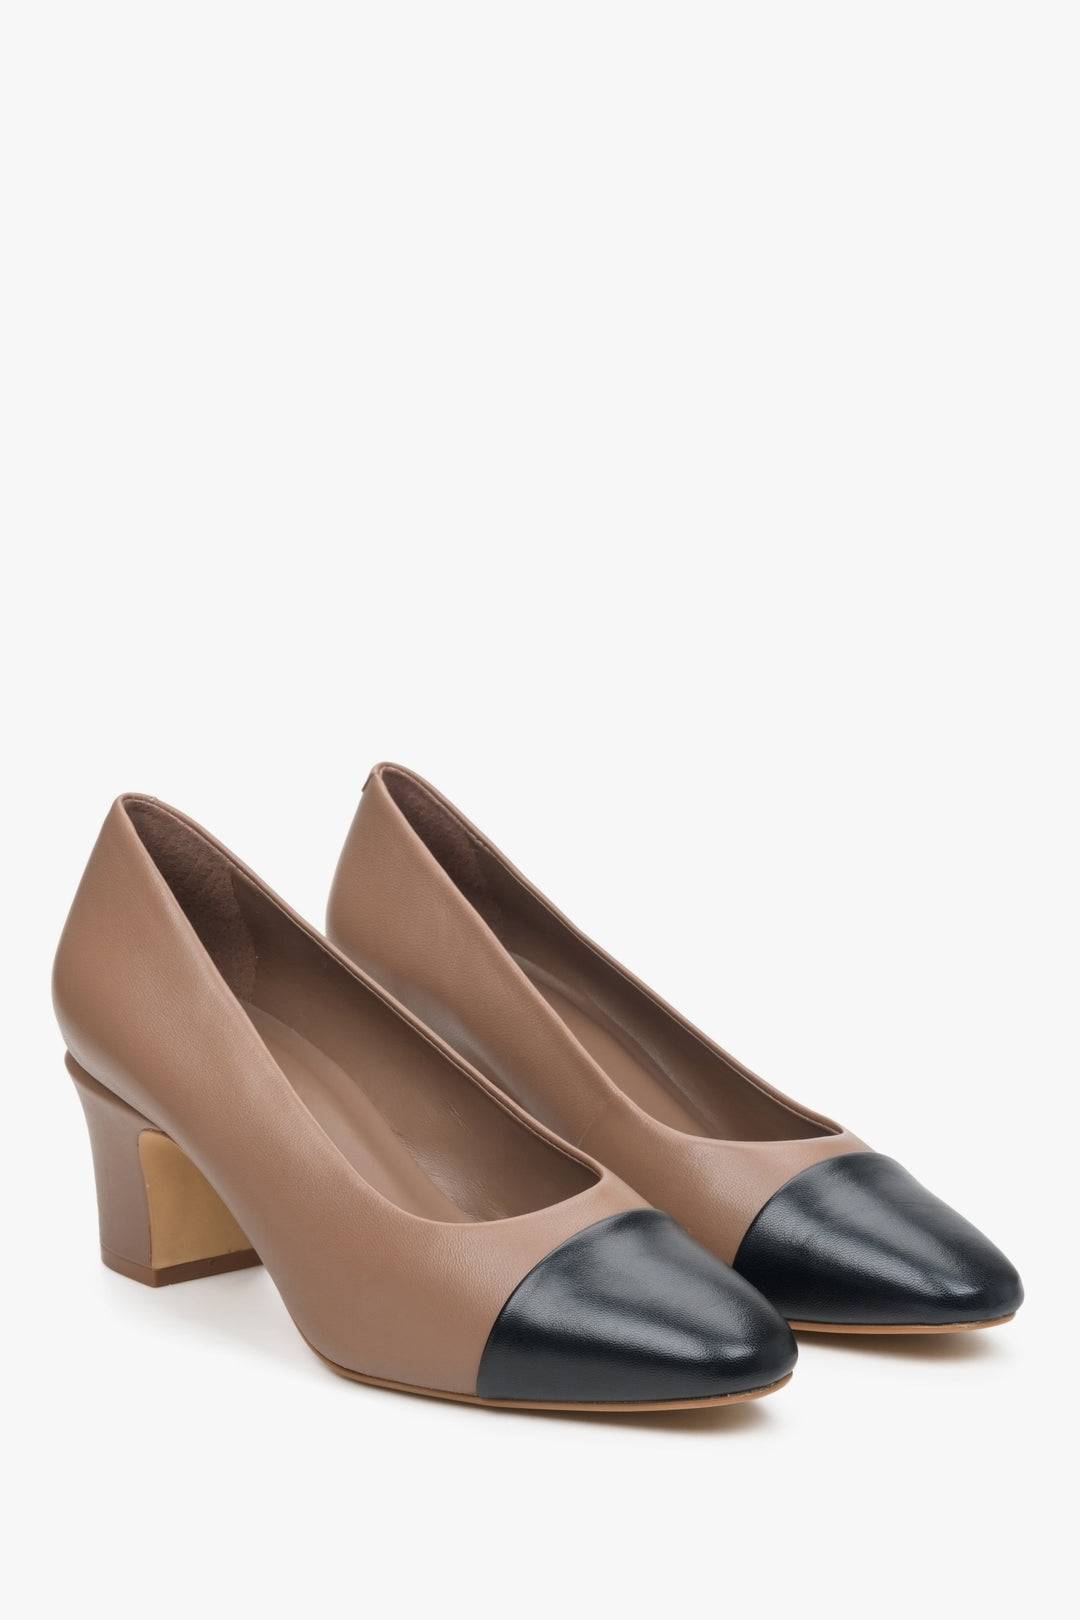 Women's brown pumps with a black toe and Estro high heels made of Italian genuine leather - a close-up of the shoe's toe.